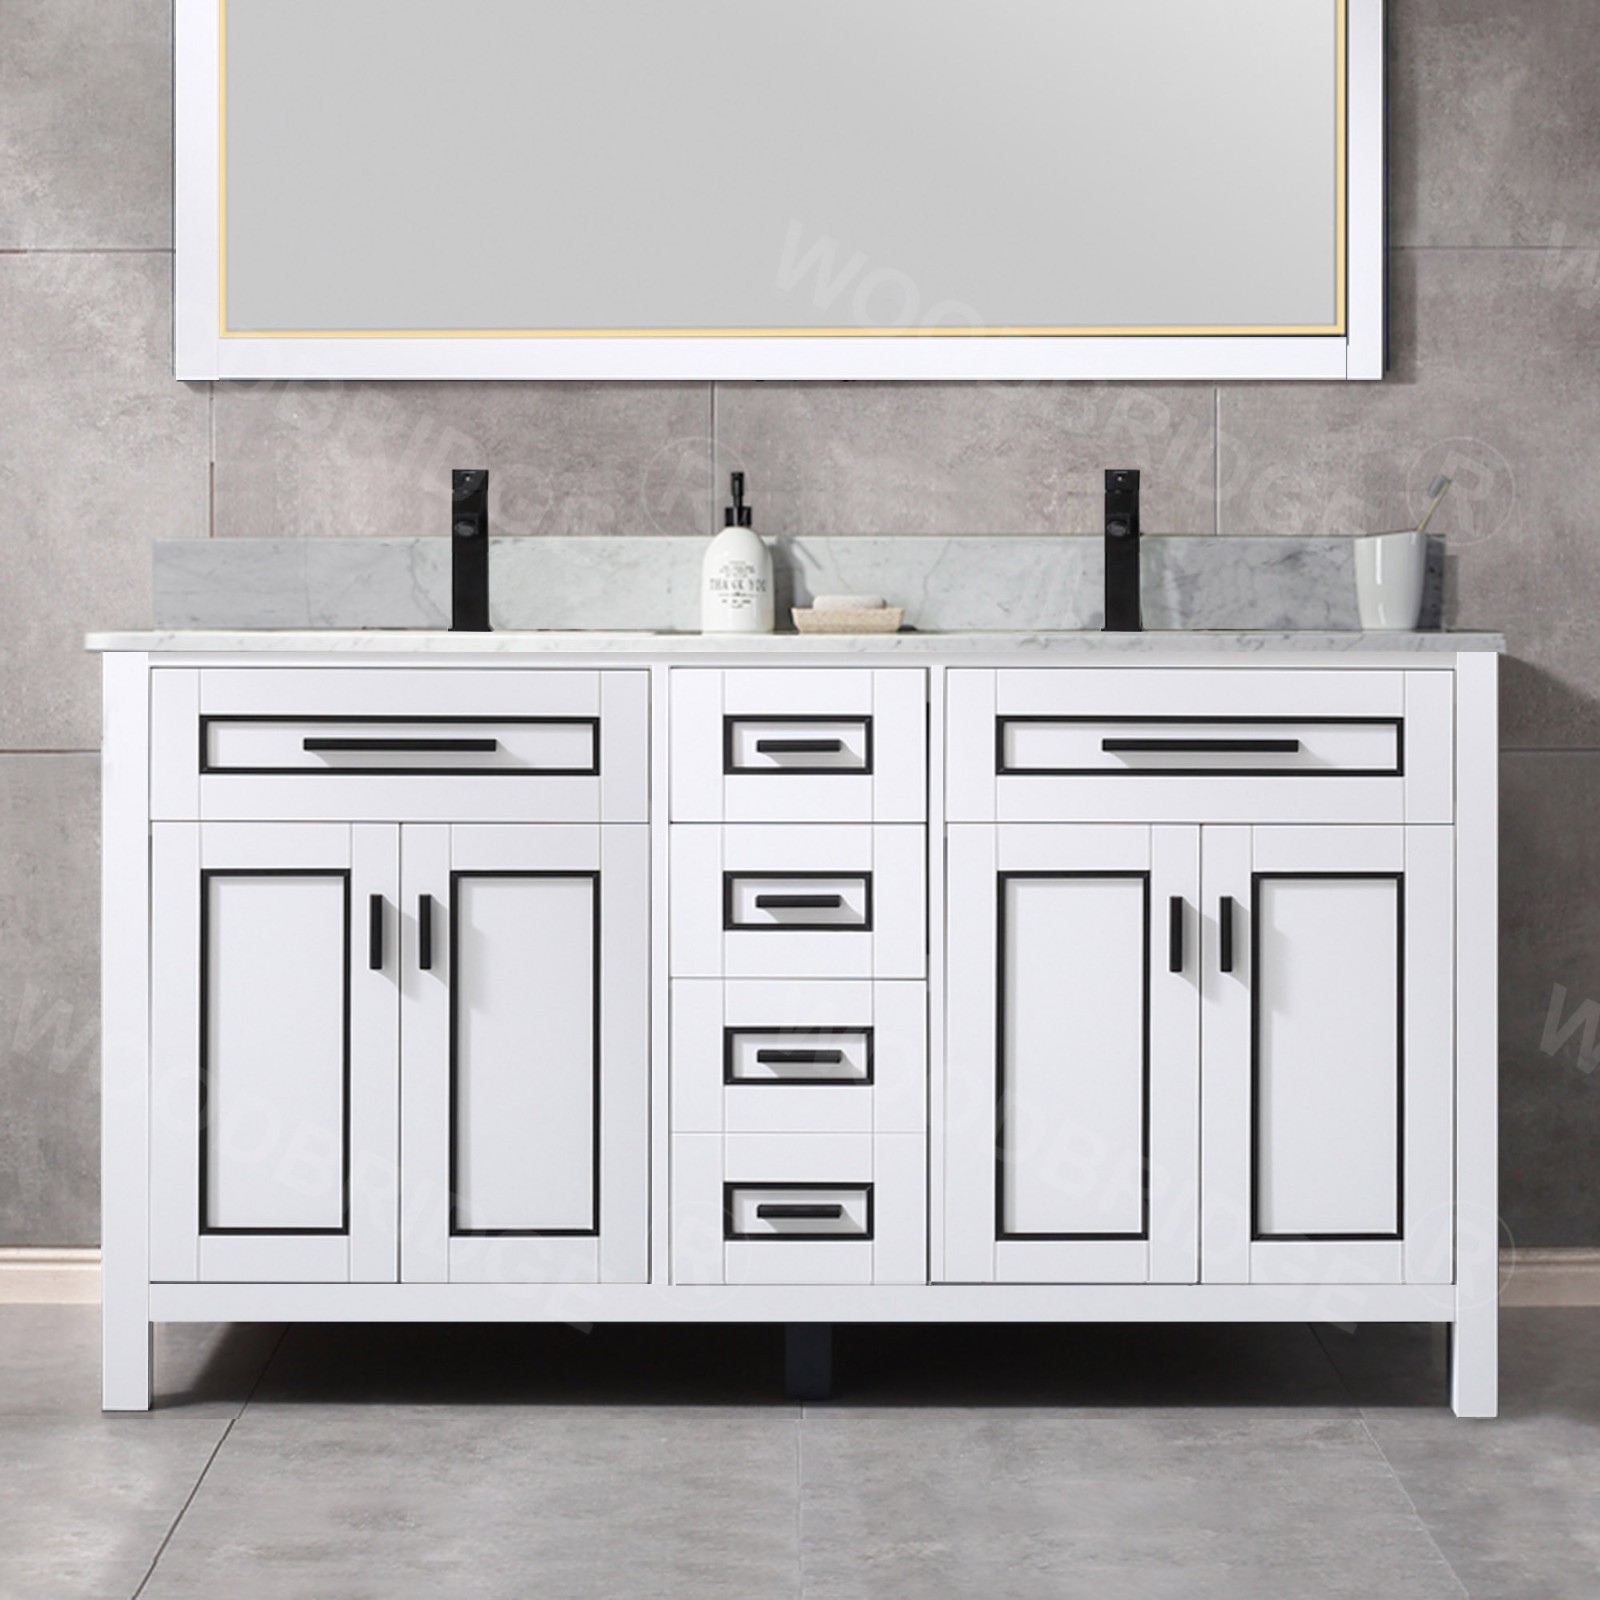  WOODBRIDGE Milan  61” Floor Mounted Single Basin Vanity Set with Solid Wood Cabinet in White, and Carrara White Marble Vanity Top with Pre-installed Undermount Rectangle Bathroom Sink in White, Pre-Drilled Single Faucet Hole_4620